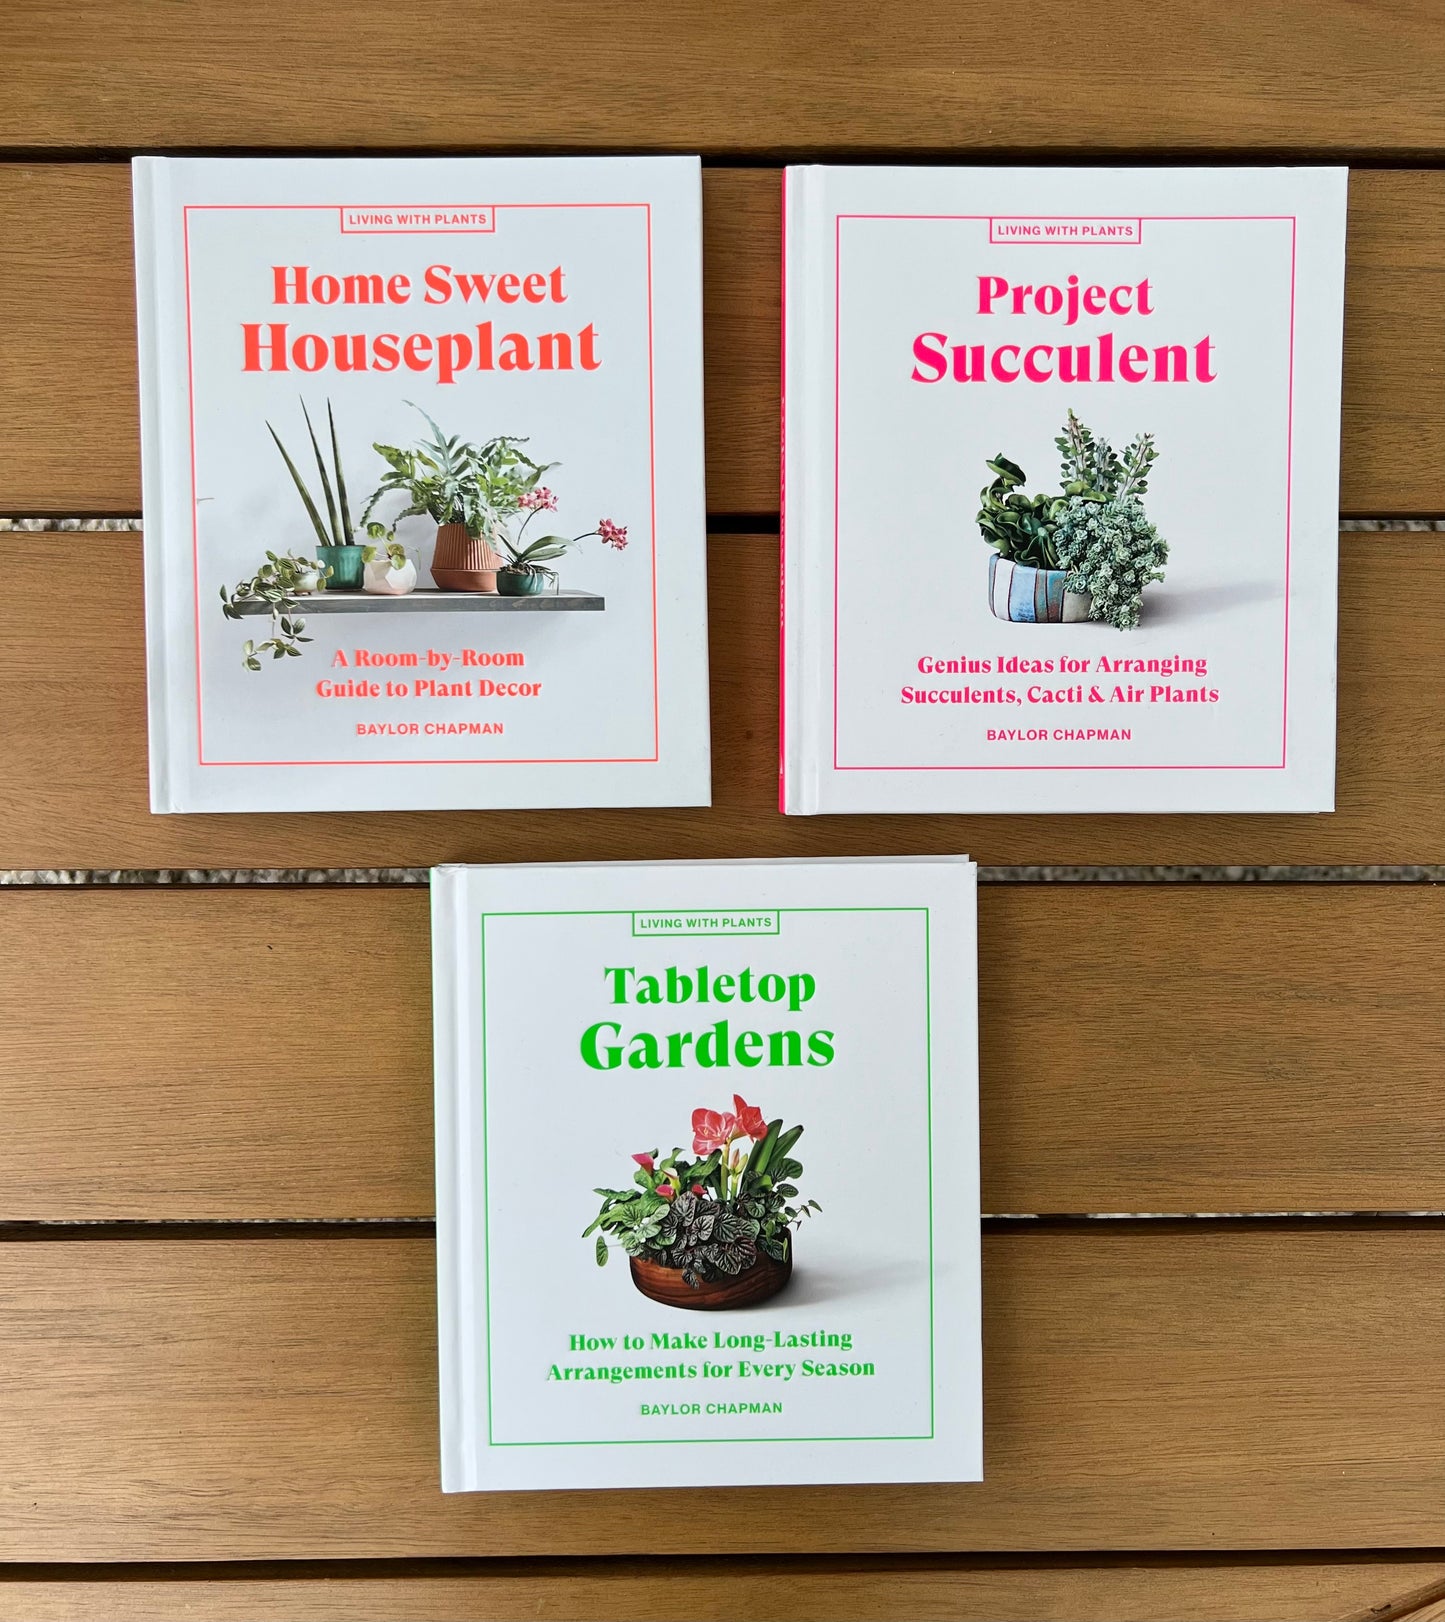 "Tabletop Gardens: How to Make Long-Lasting Arrangements for Every Season" Book